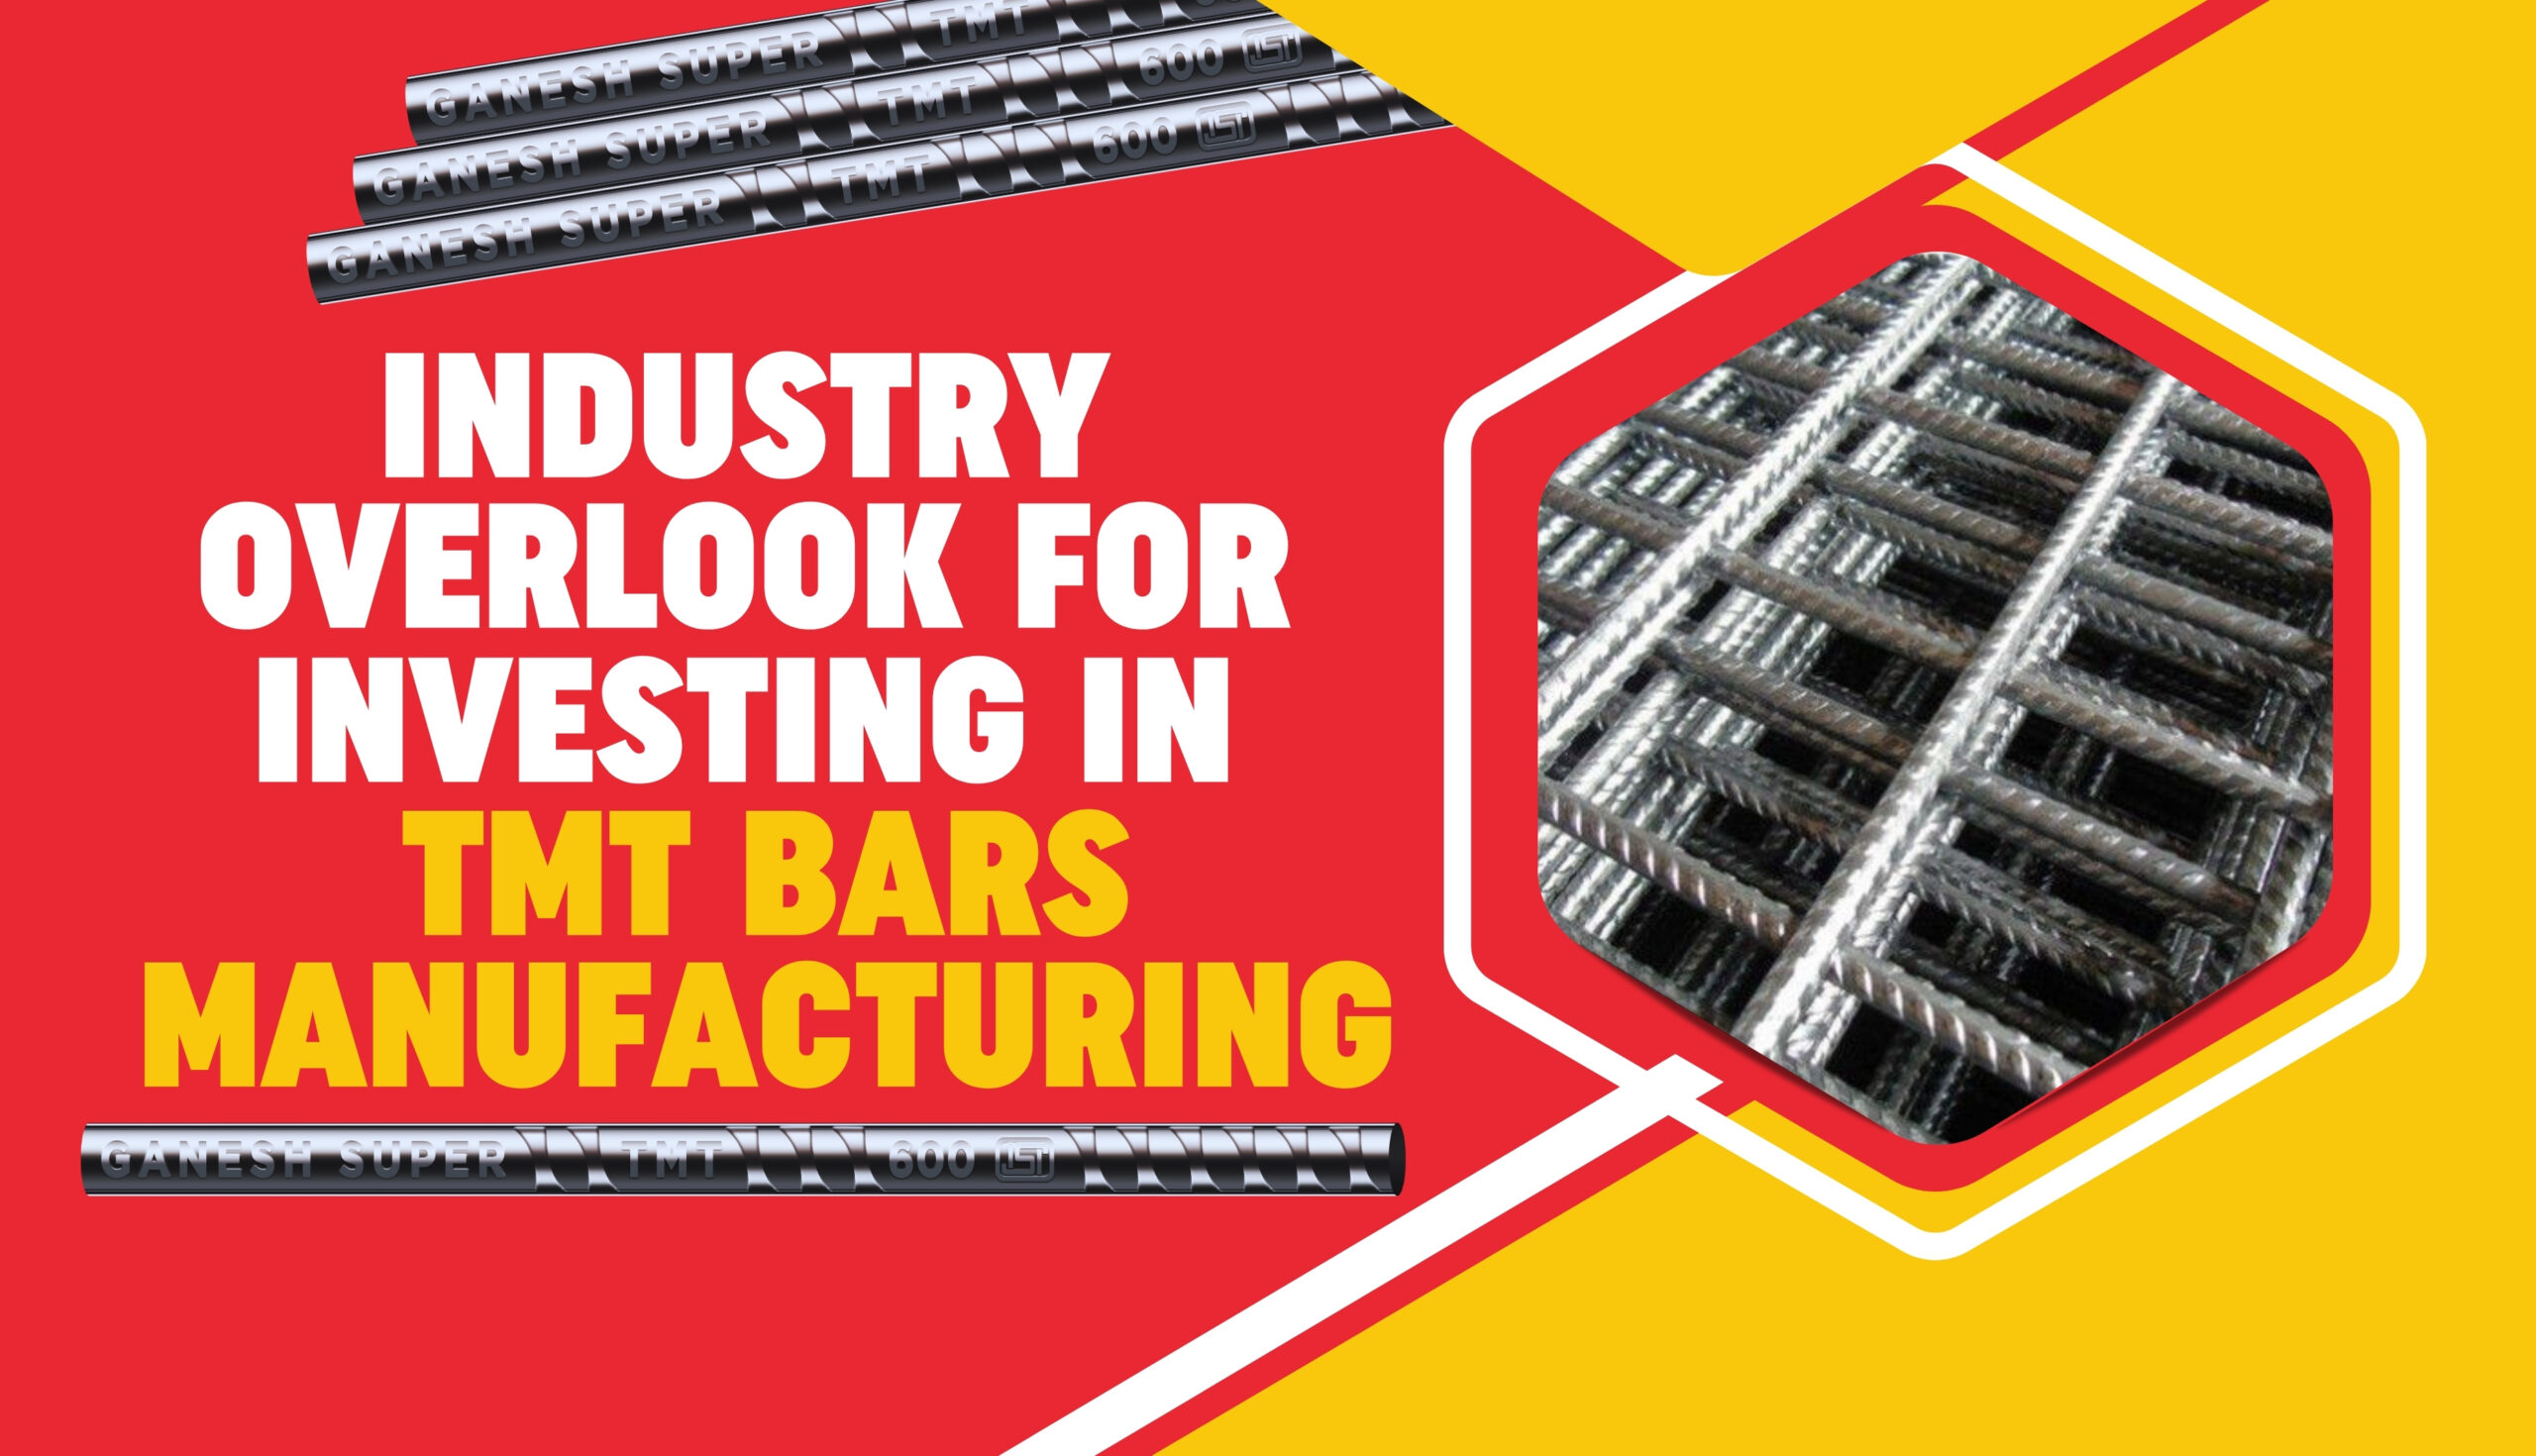 Industry Overlook for Investing in TMT Bars Manufacturing